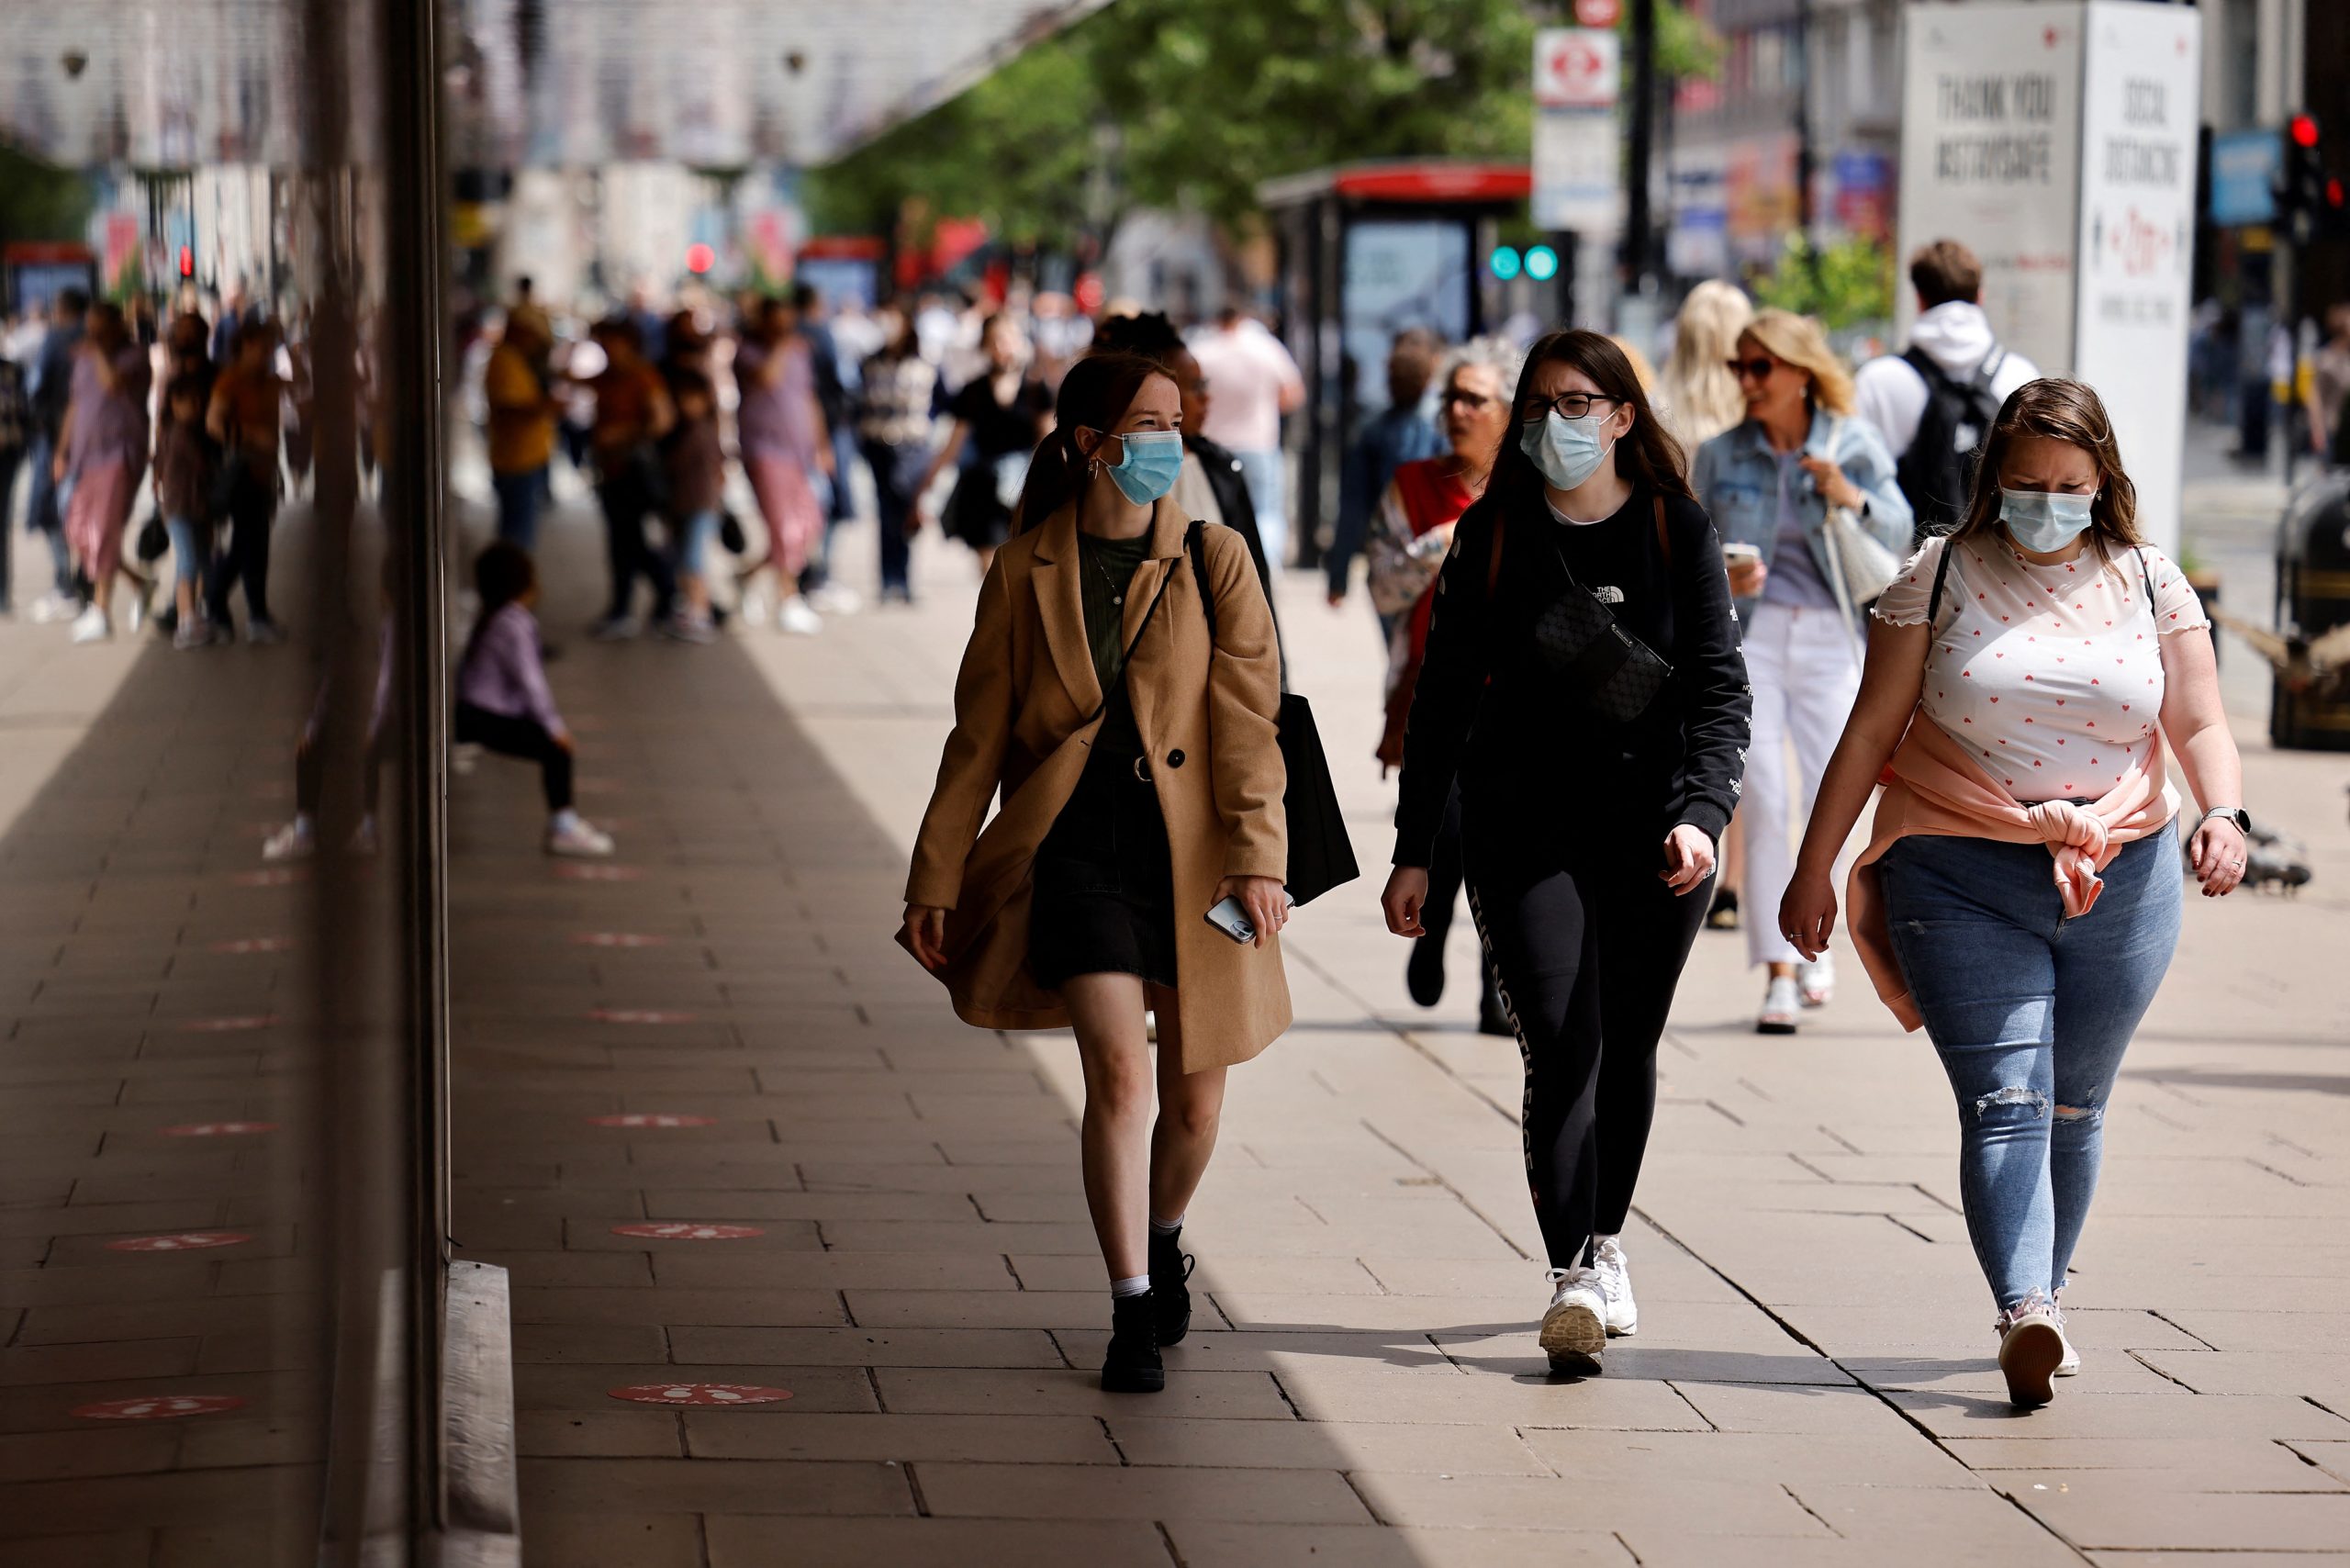 Pedestrians wearing a face mask or covering due to the COVID-19 pandemic, walk along Oxford Street in central London on June 6, 2021. - The Delta variant of the coronavirus, first discovered in India, is estimated to be 40 percent more transmissible than the Alpha variant that caused the last wave of infections in the UK, Britain's health minister said Sunday. (Photo by Tolga Akmen / AFP)